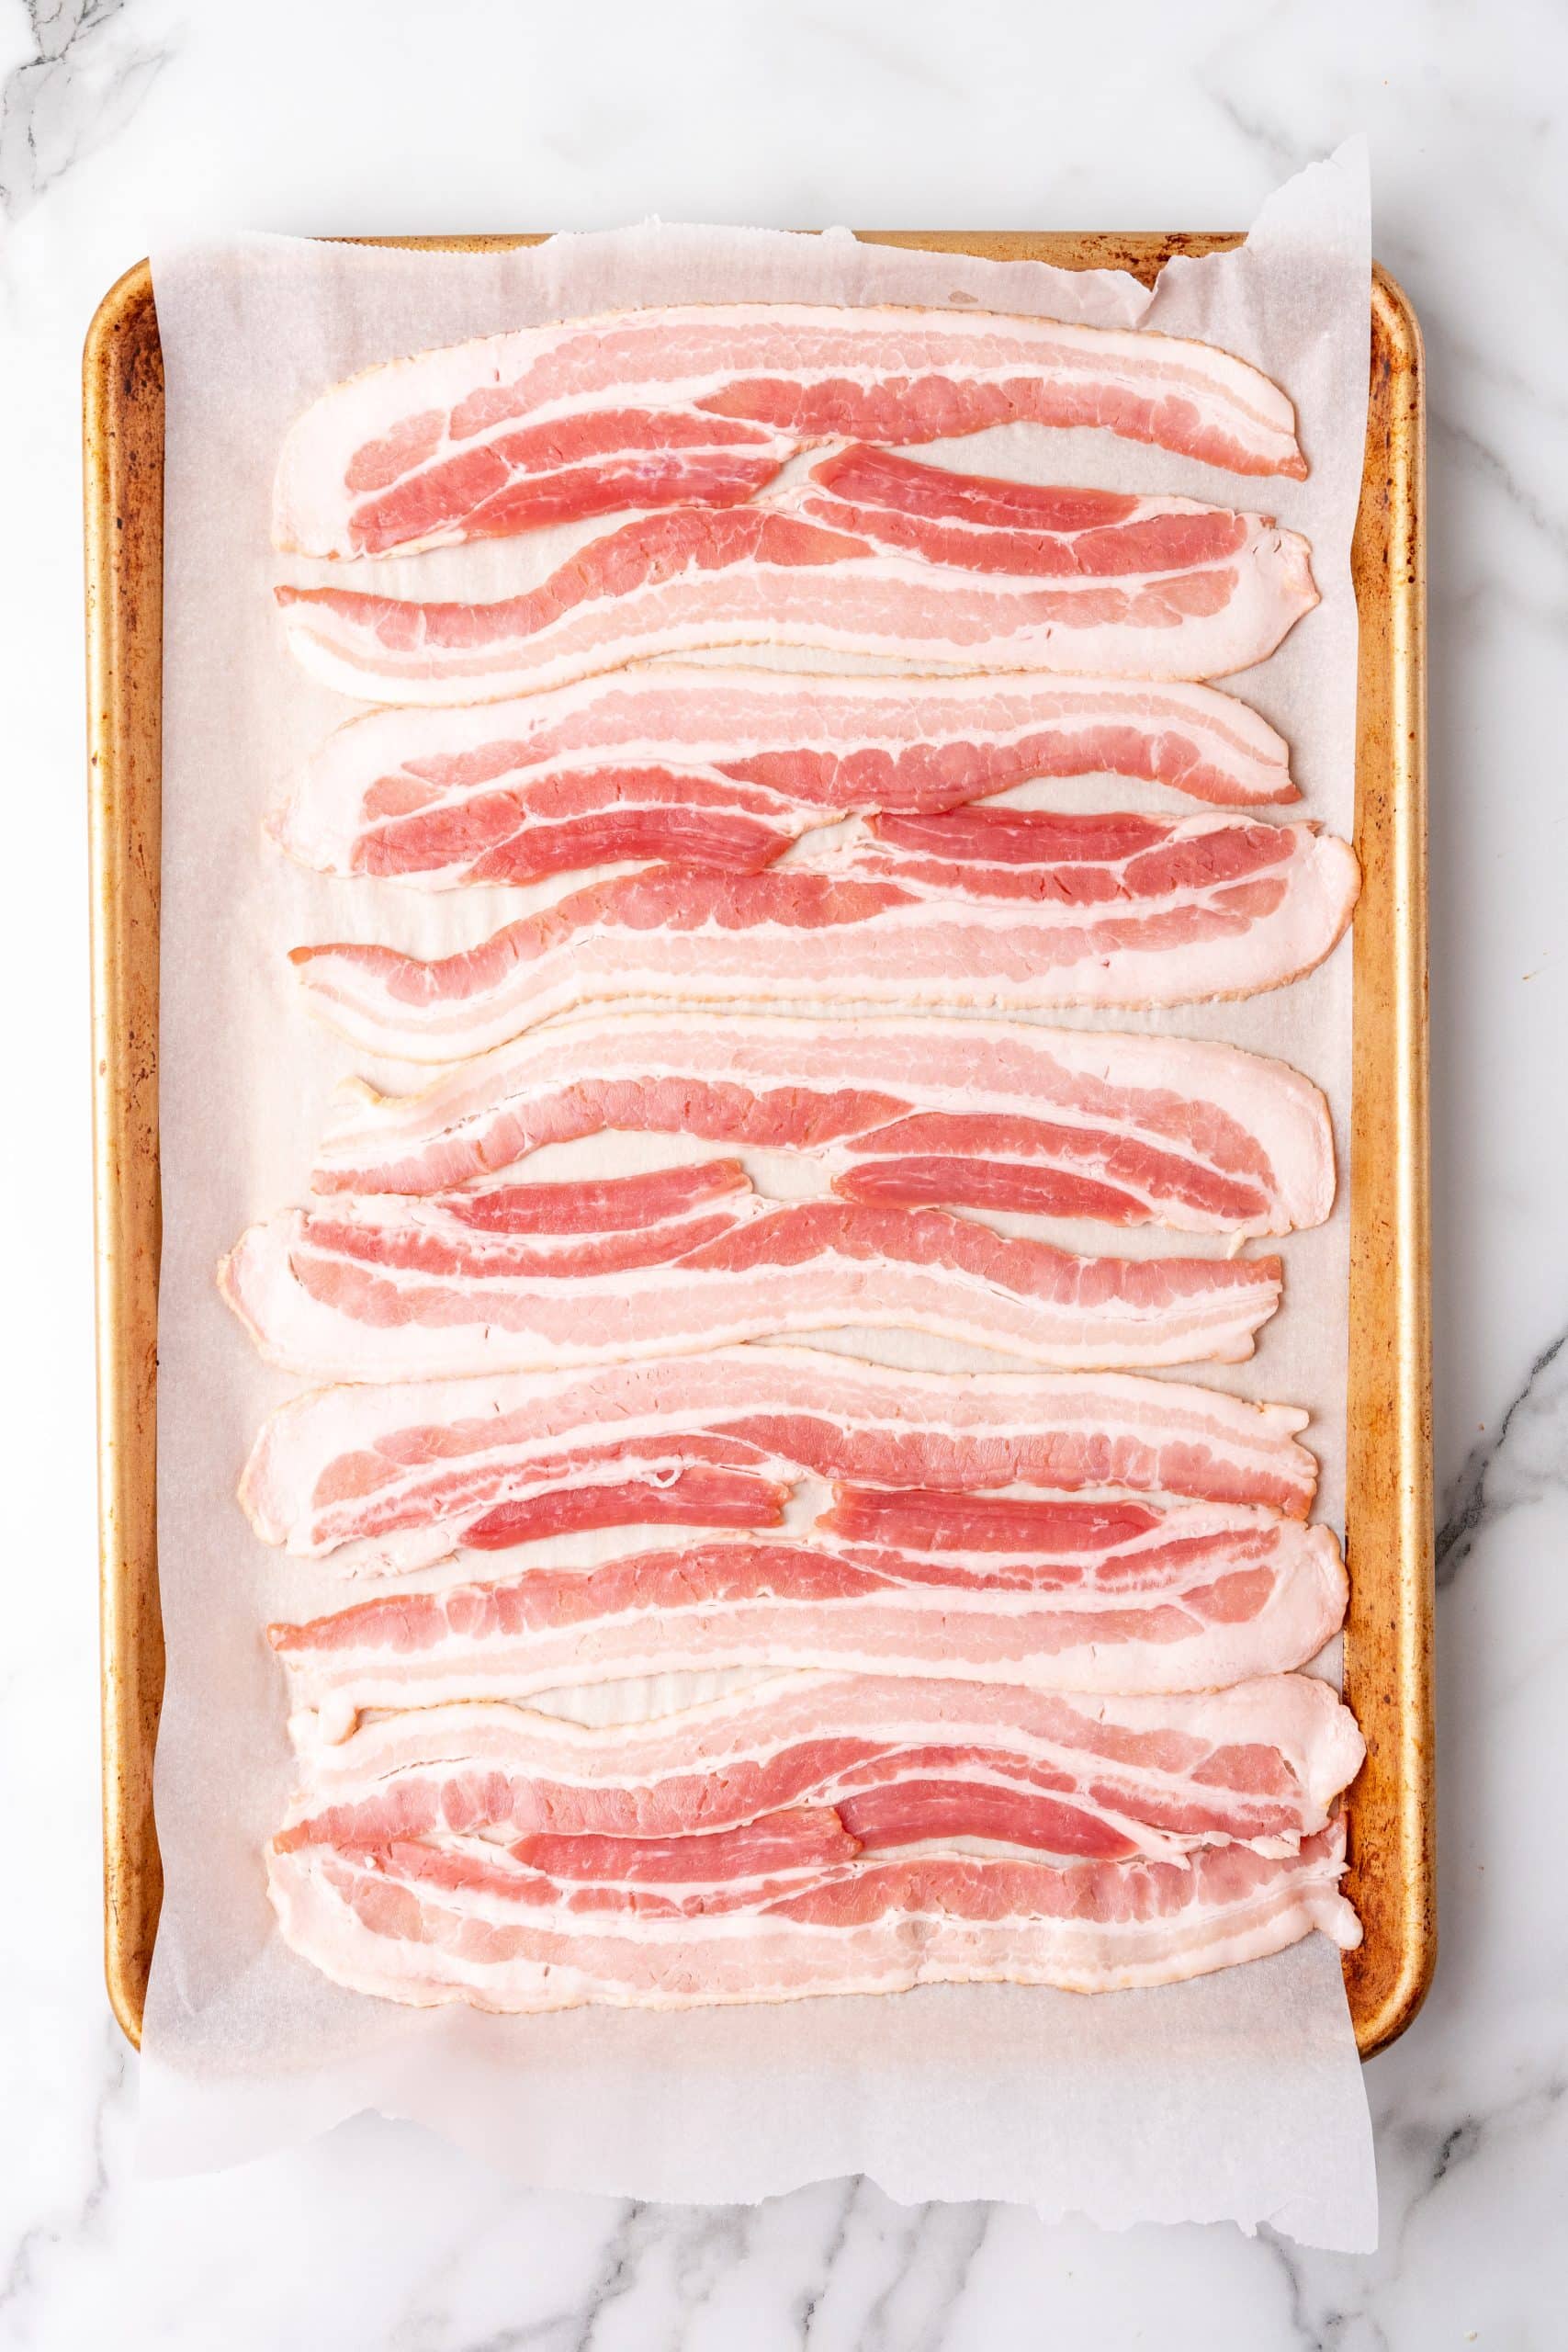 slices of bacon on a parchment paper lined baking sheet